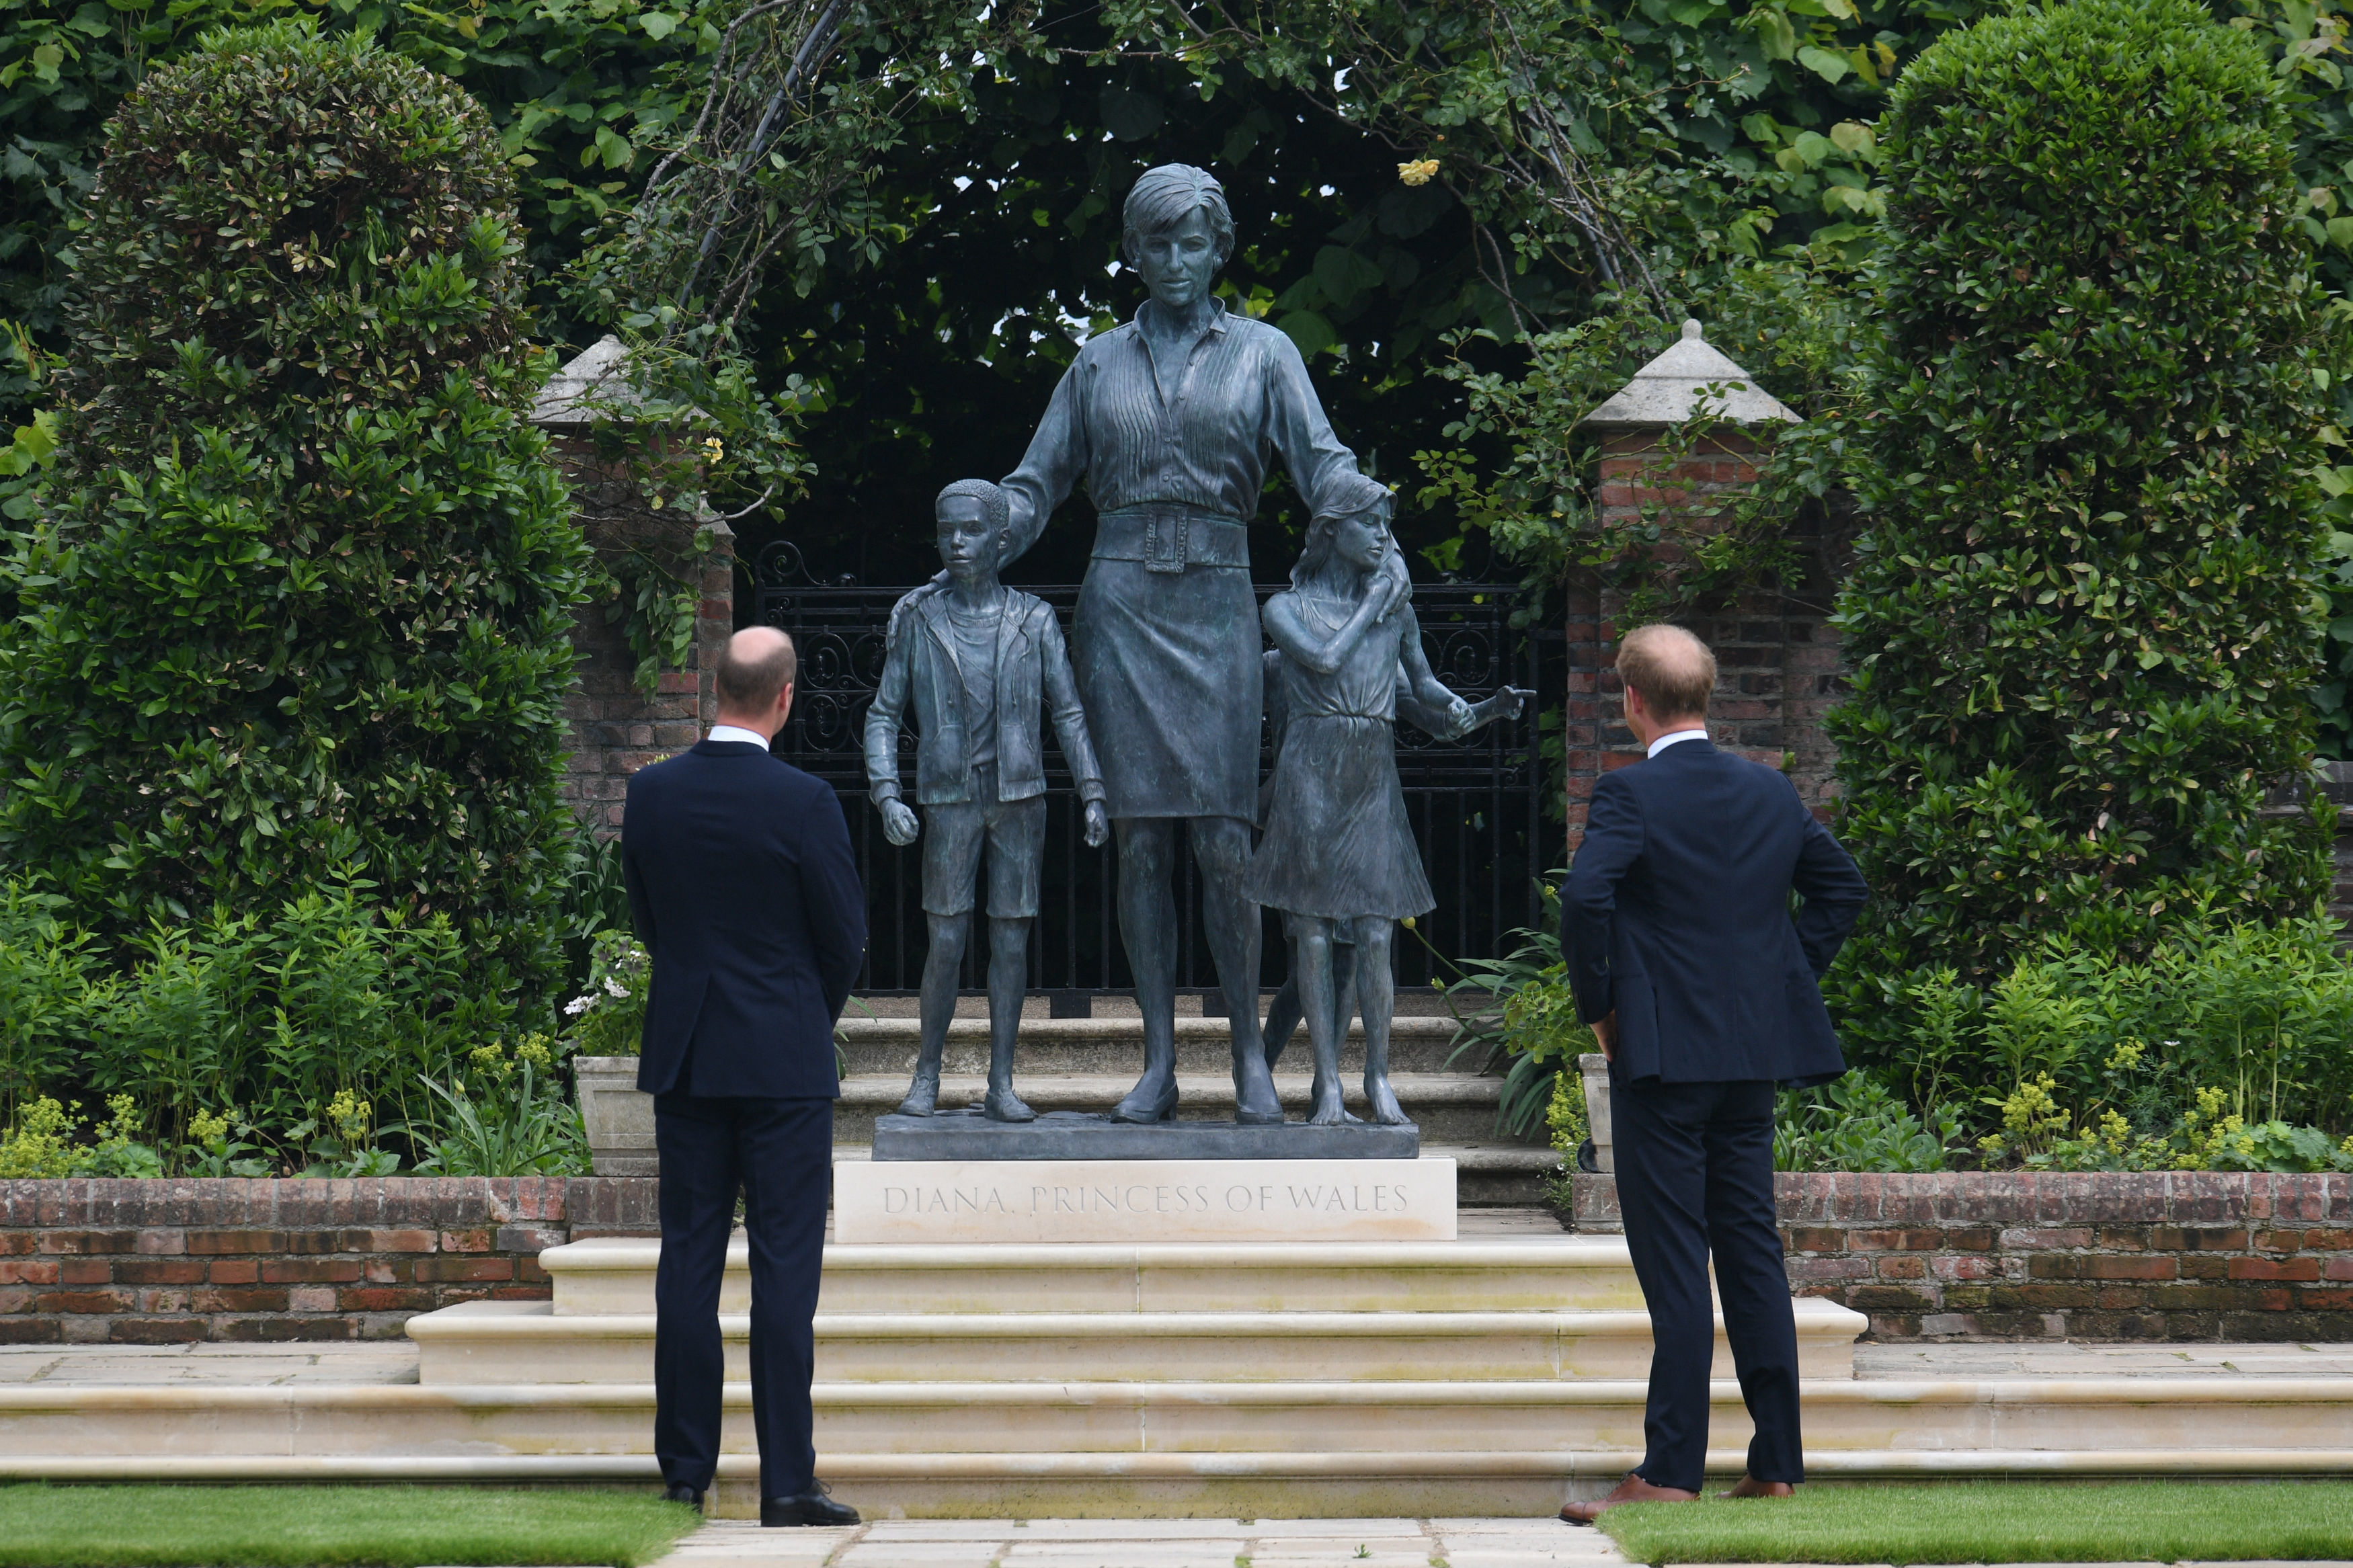 Prince William and Prince Harry unveil a statue of their mother, Princess Diana, at The Sunken Garden in Kensington Palace